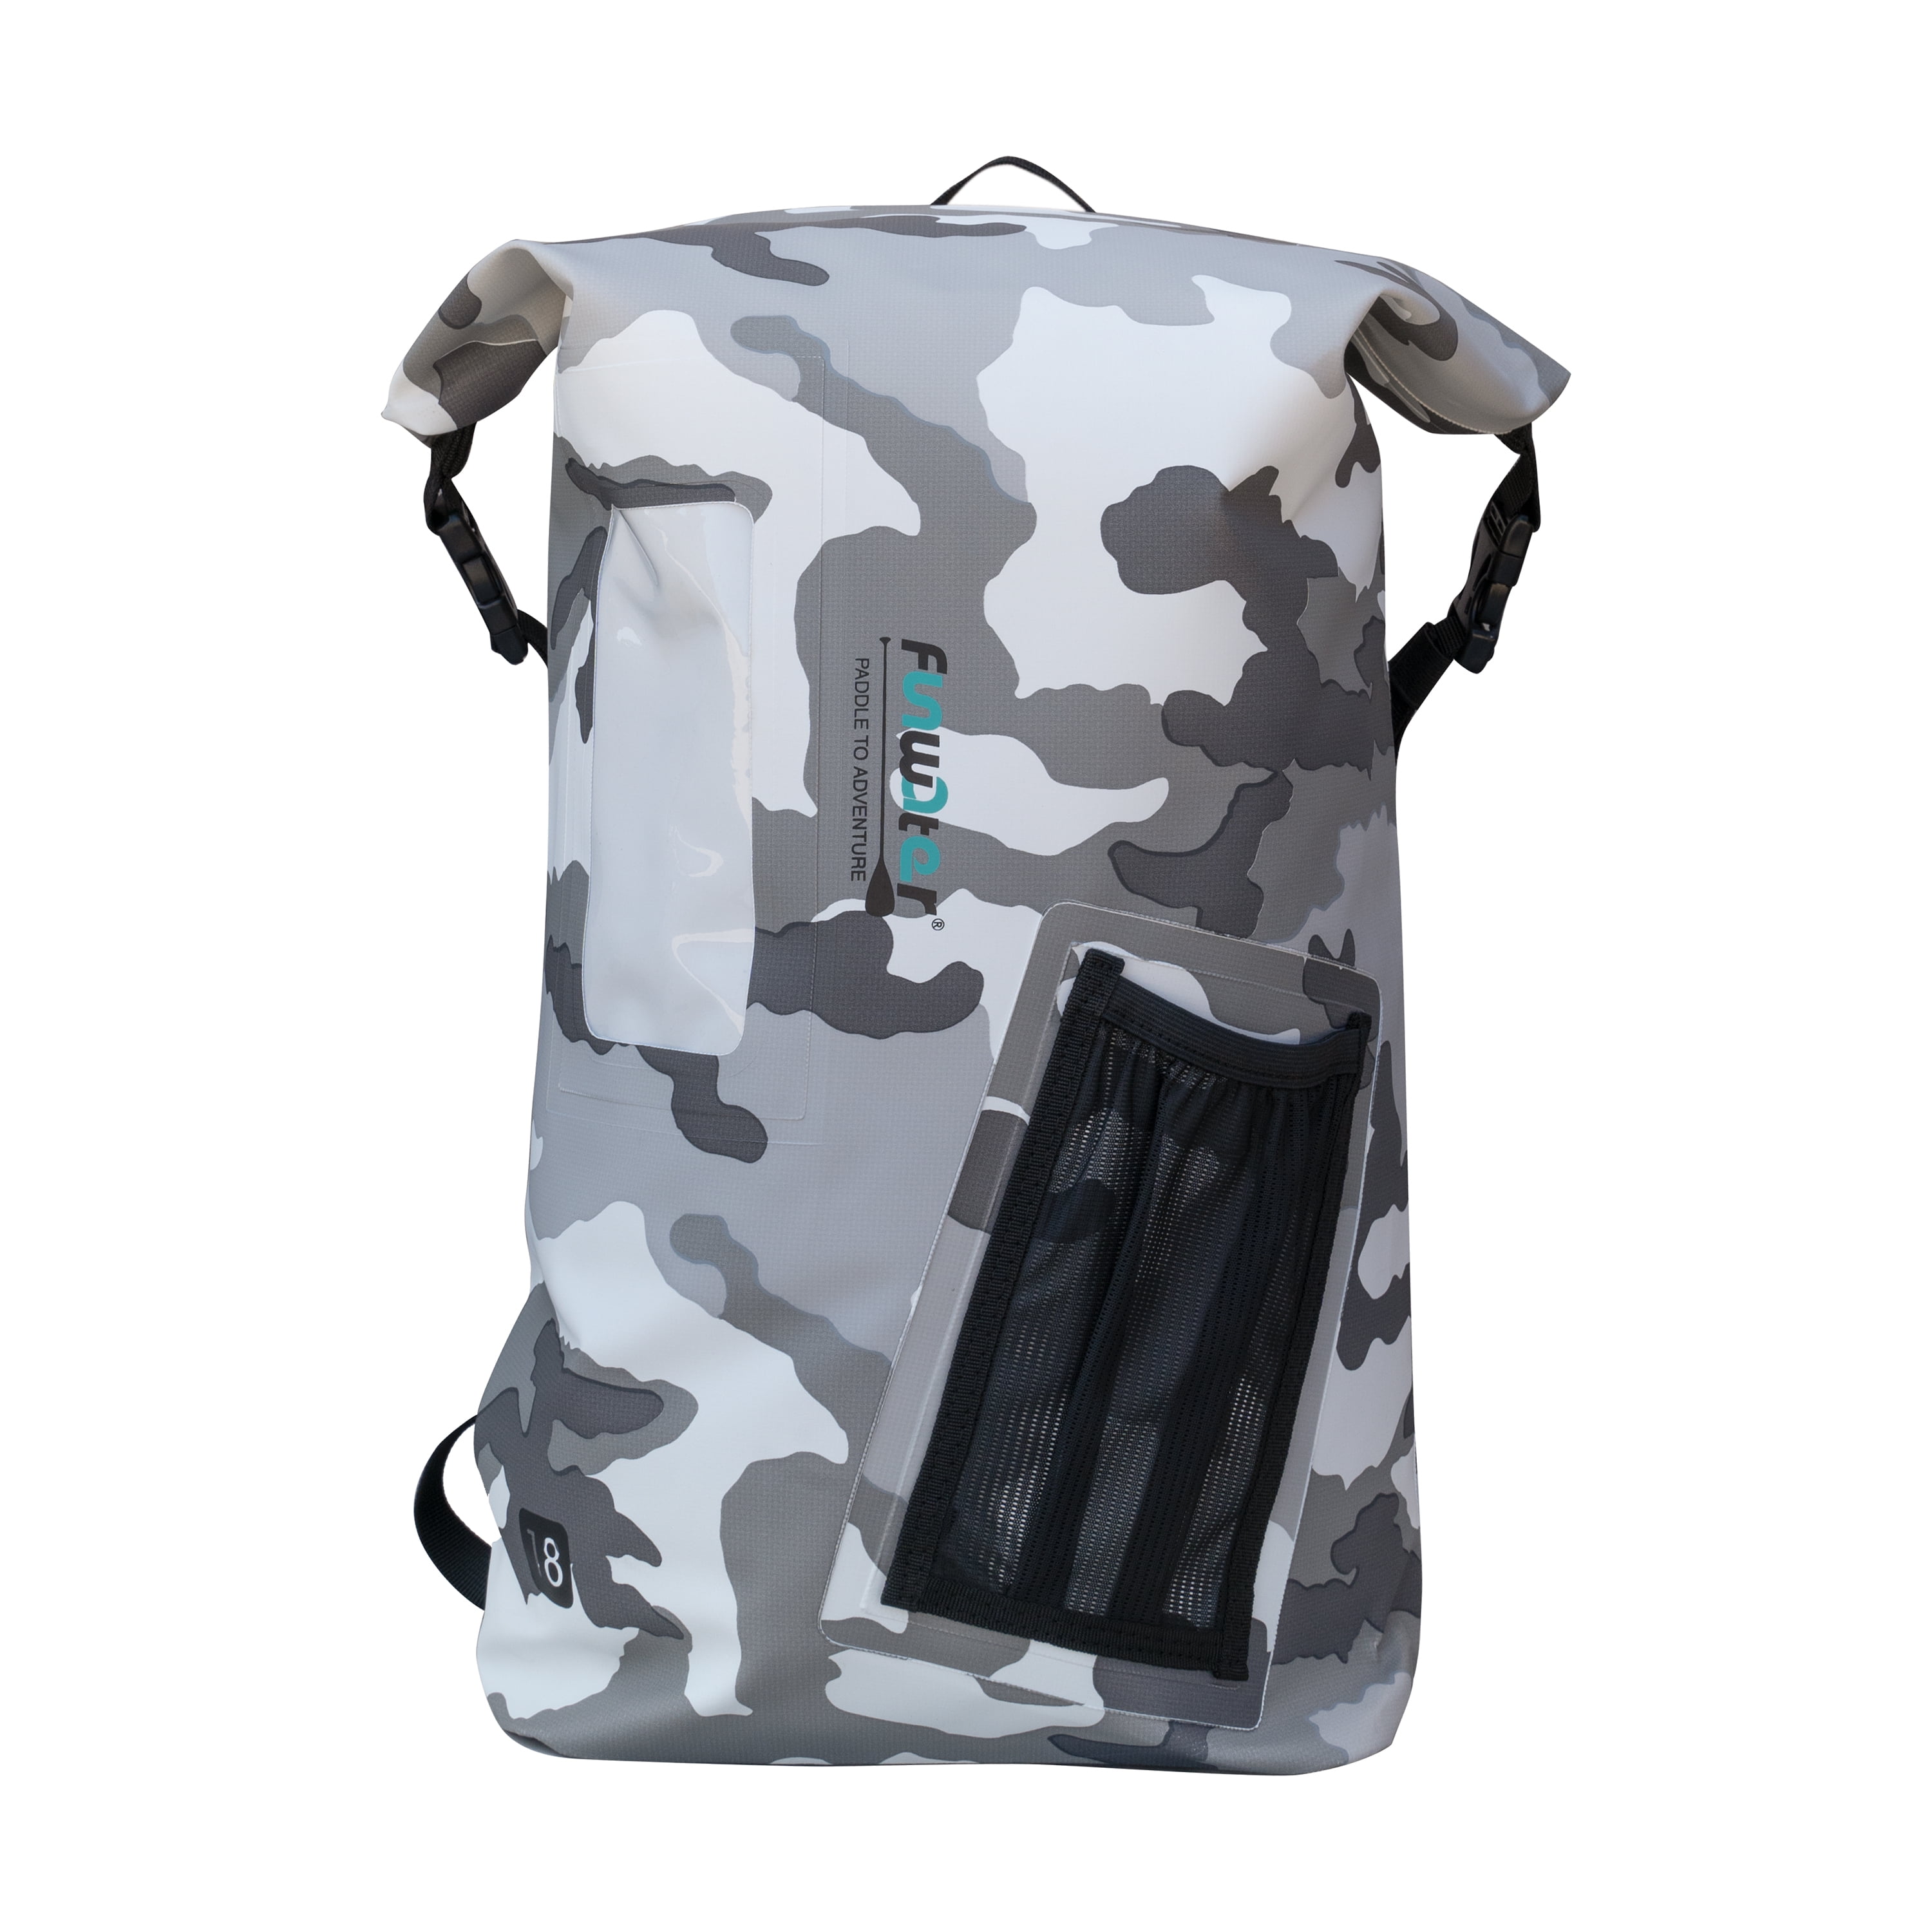 FUNWATER Waterproof Backpack Grey Camo,18L Roll Top Dry Bag, Casual Sports  Backpack, Surfing, Boating, Hiking, Fishing, Unisex. 